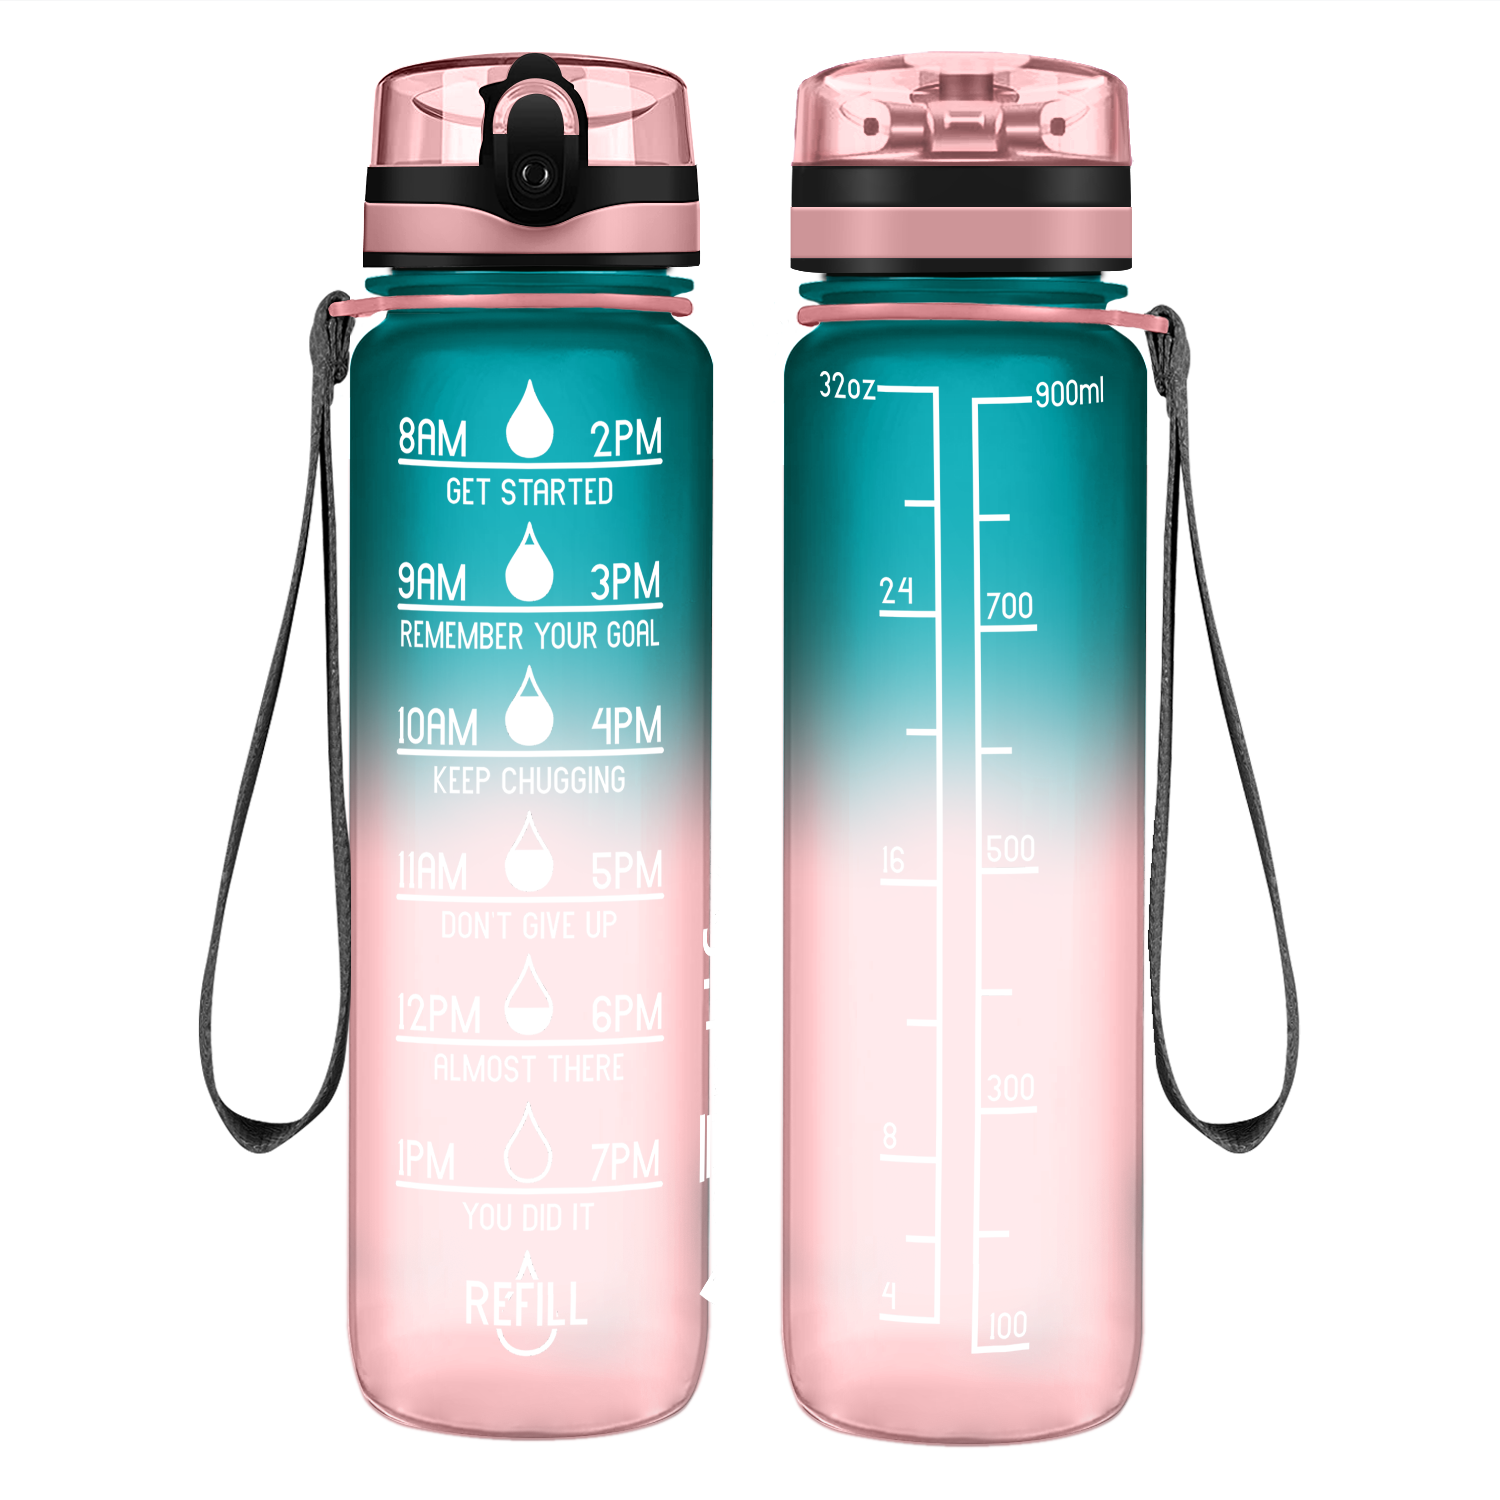 Cuptify Cotton Candy Frosted Motivational Water Bottle